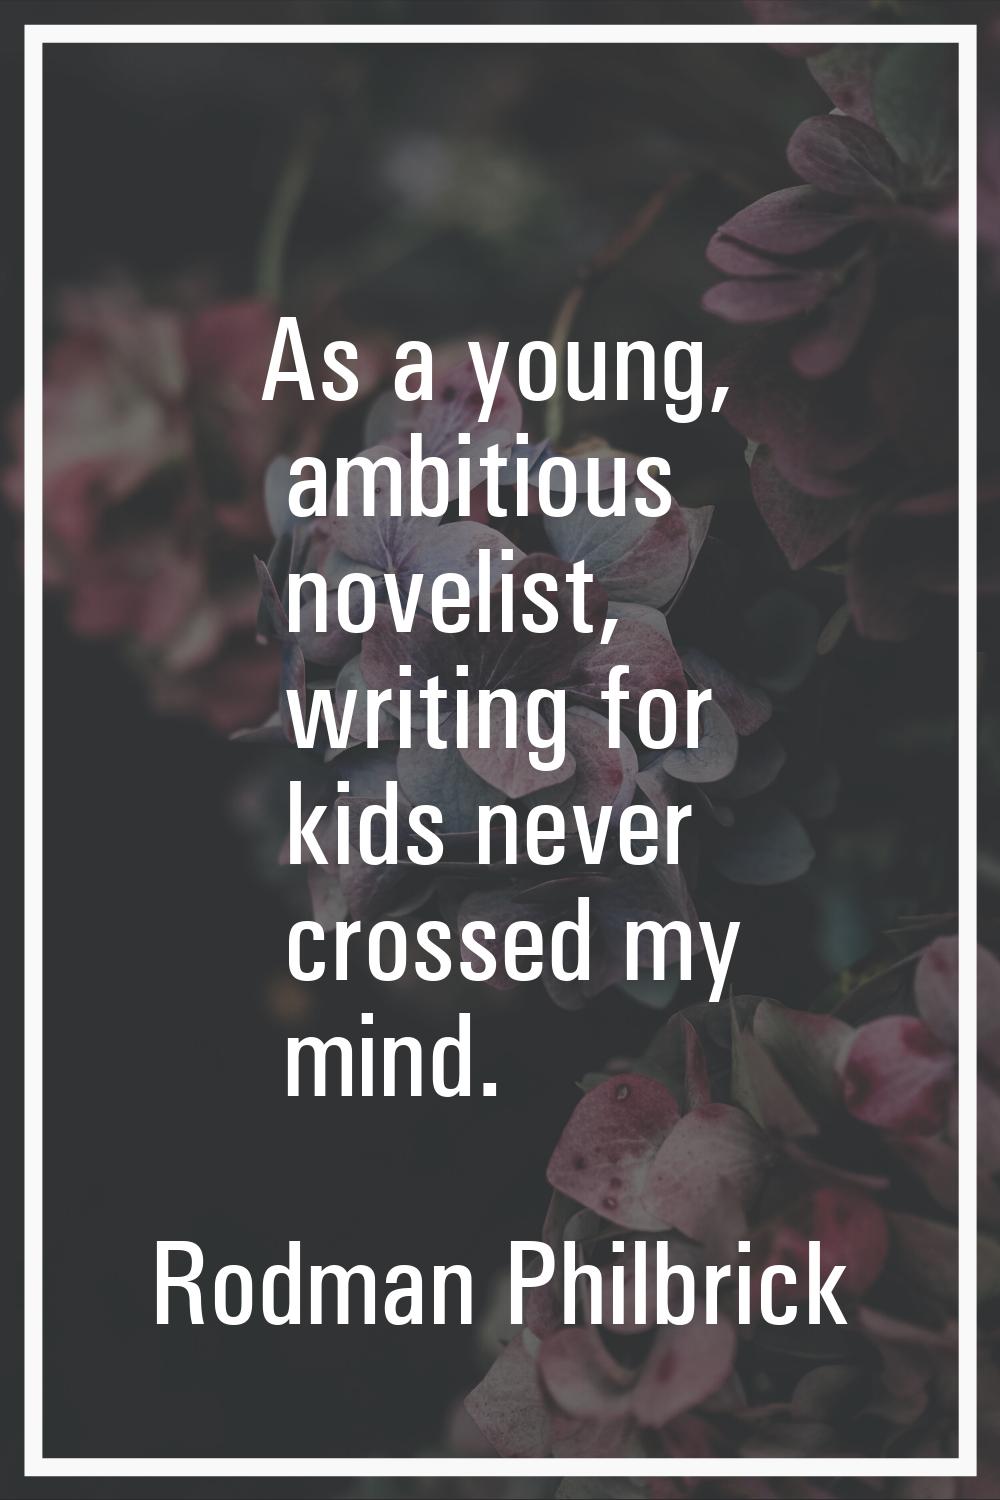 As a young, ambitious novelist, writing for kids never crossed my mind.